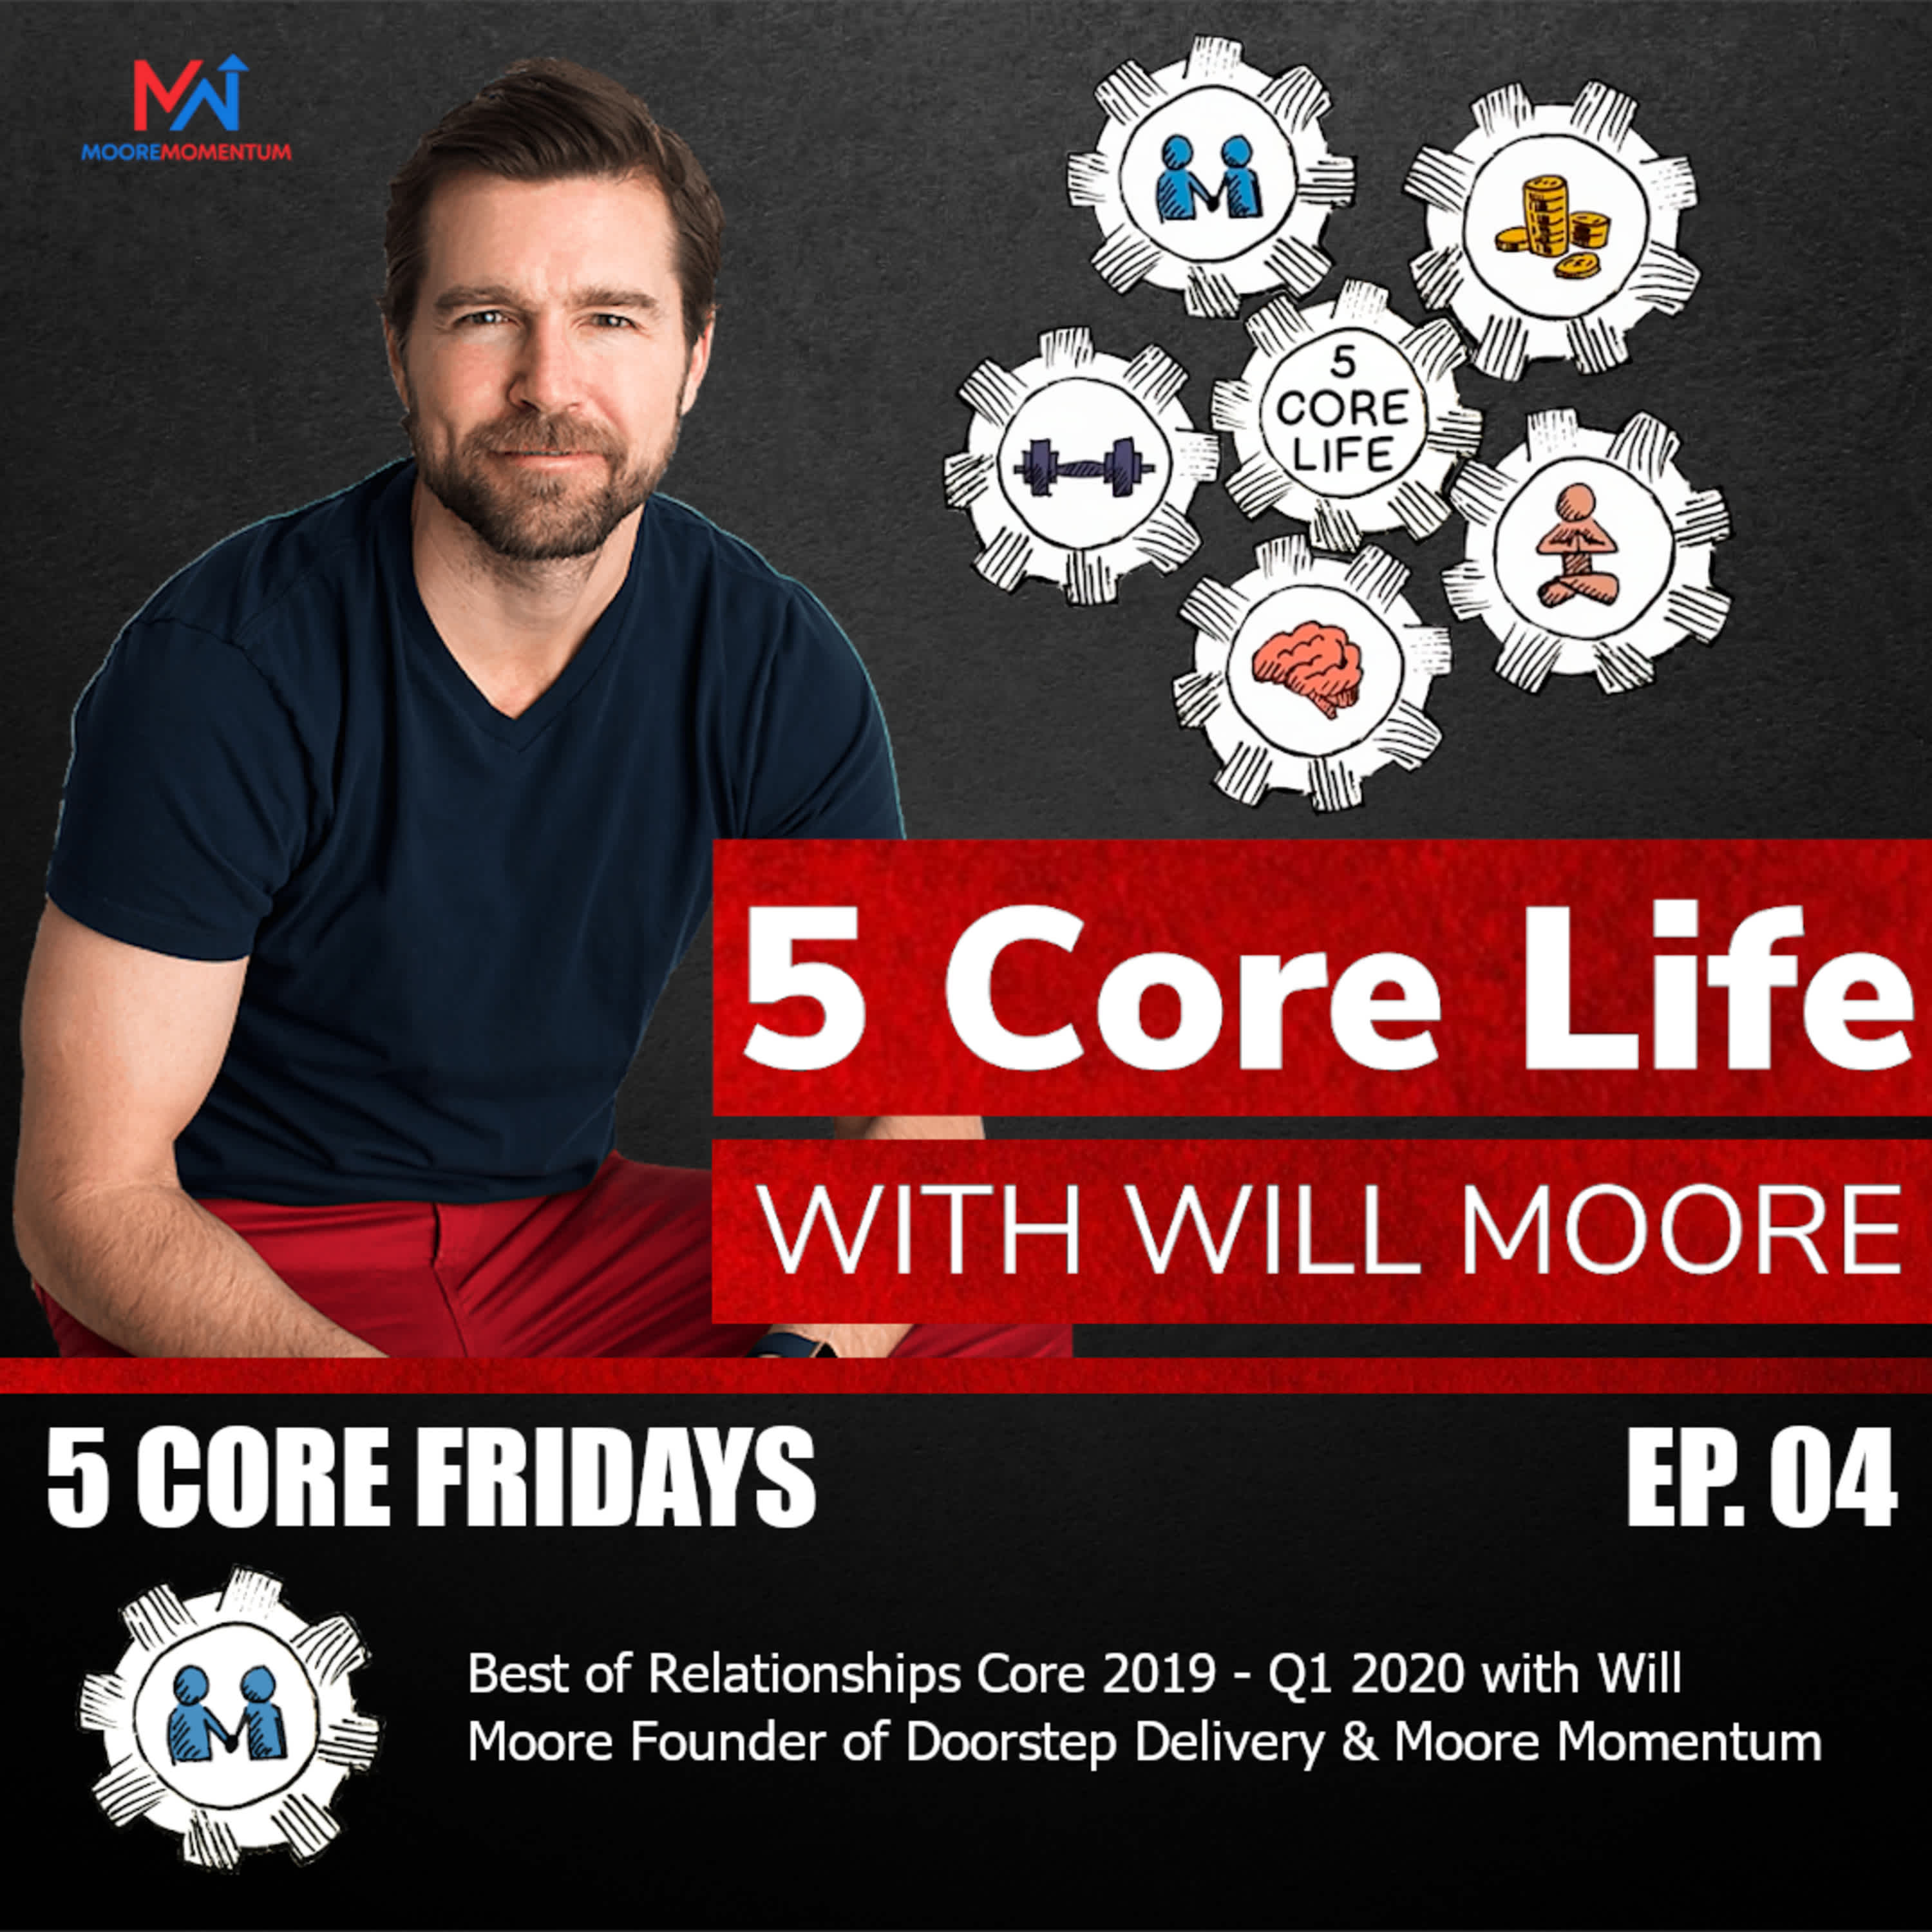 Best of Relationships Core 2019 - Q1 2020 with Will Moore Founder of Doorstep Delivery & Moore Momentum